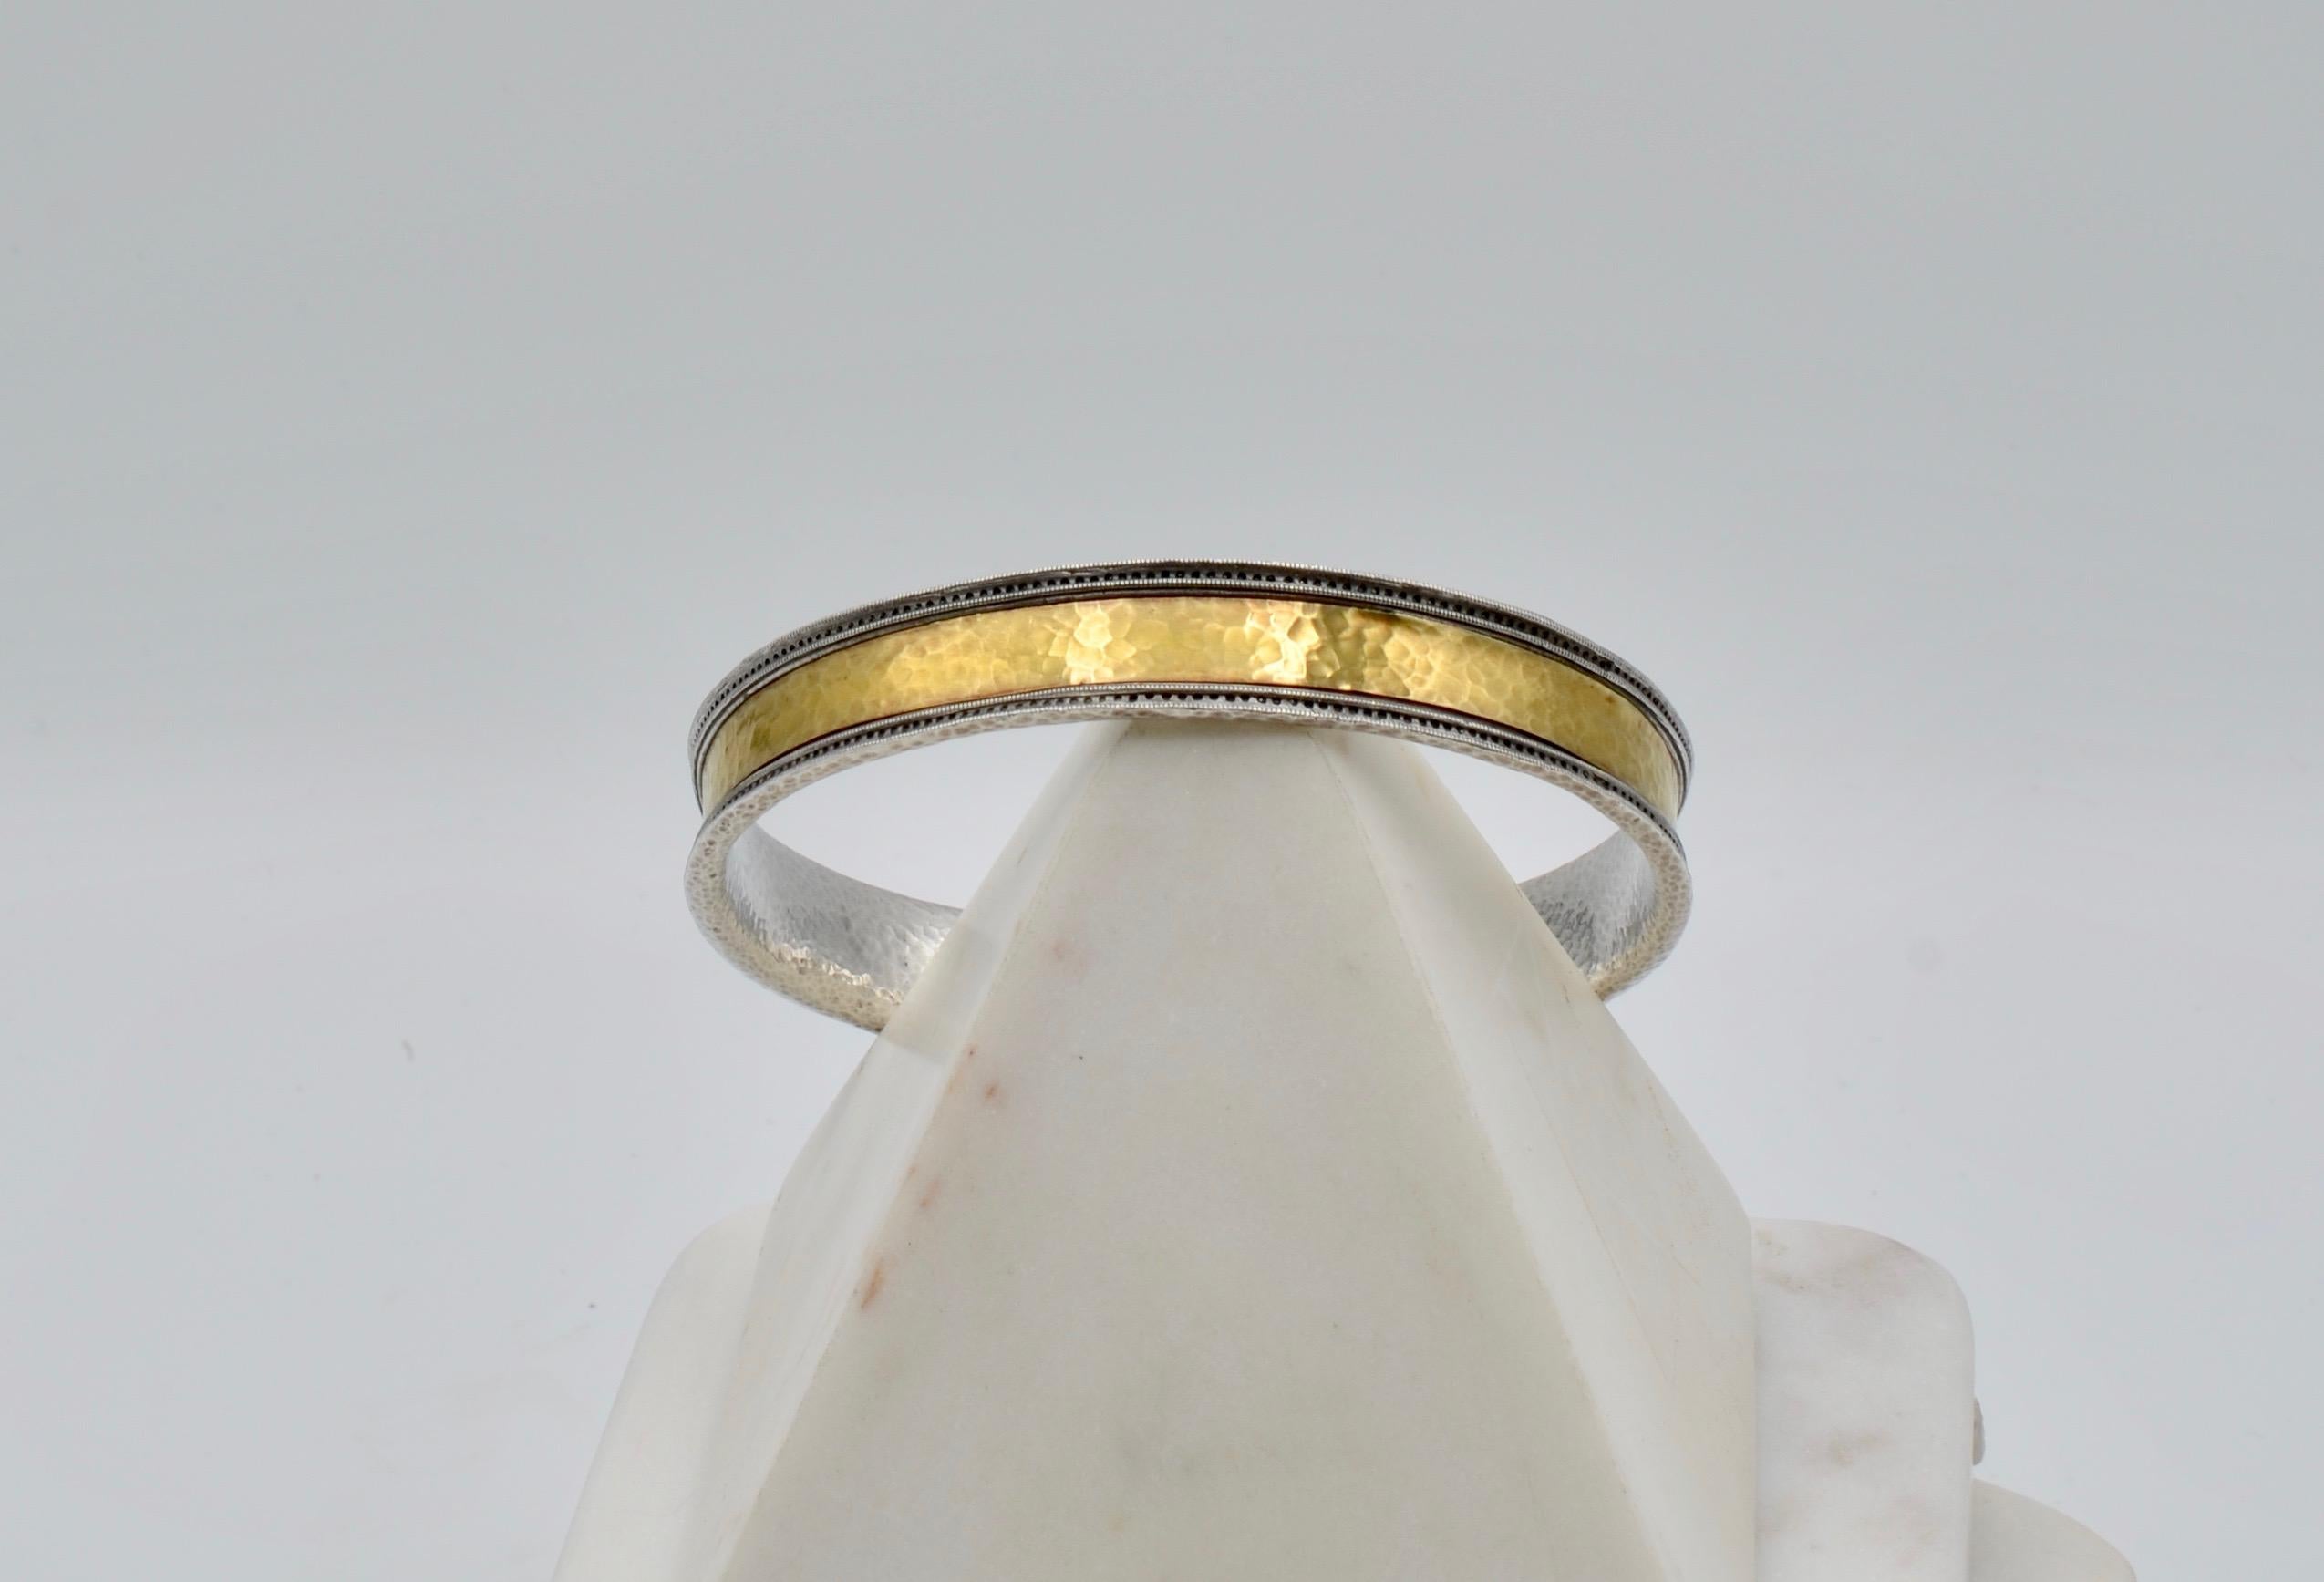 This beautifully hammered bangle bracelet is sterling silver and 22 karat gold. It is a great weight and look to wear alone or to add to you bracelet collection and layer. The outside edges have a texture that appears at first glance to be a row of